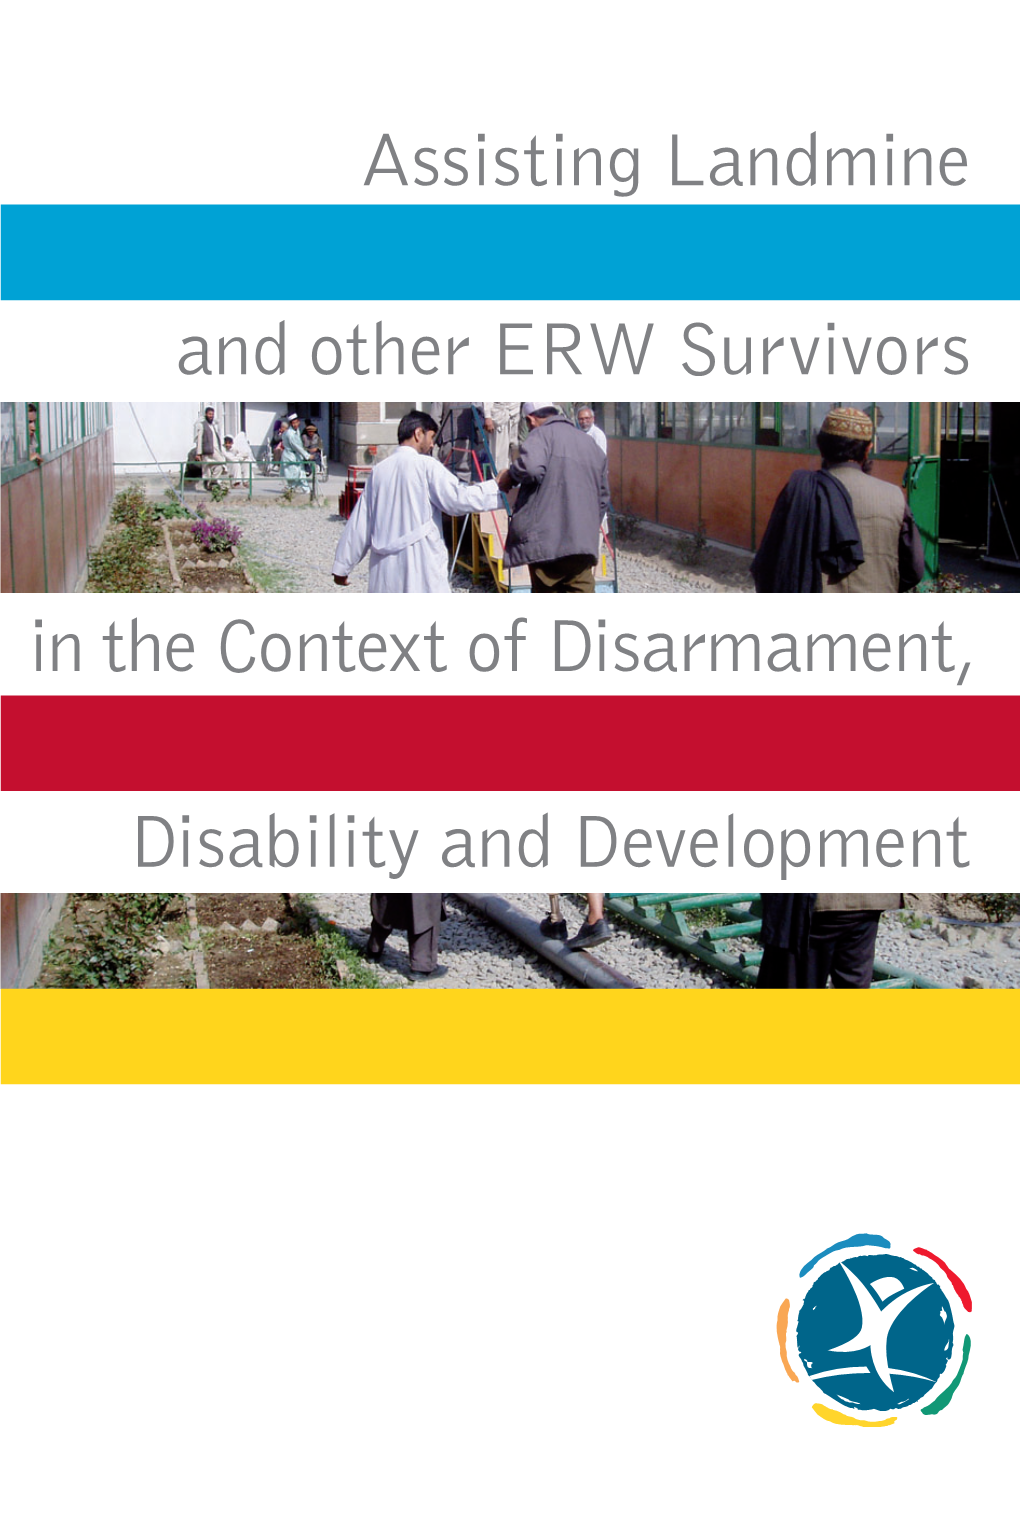 Assistance to Landmine and Other ERW Survivors